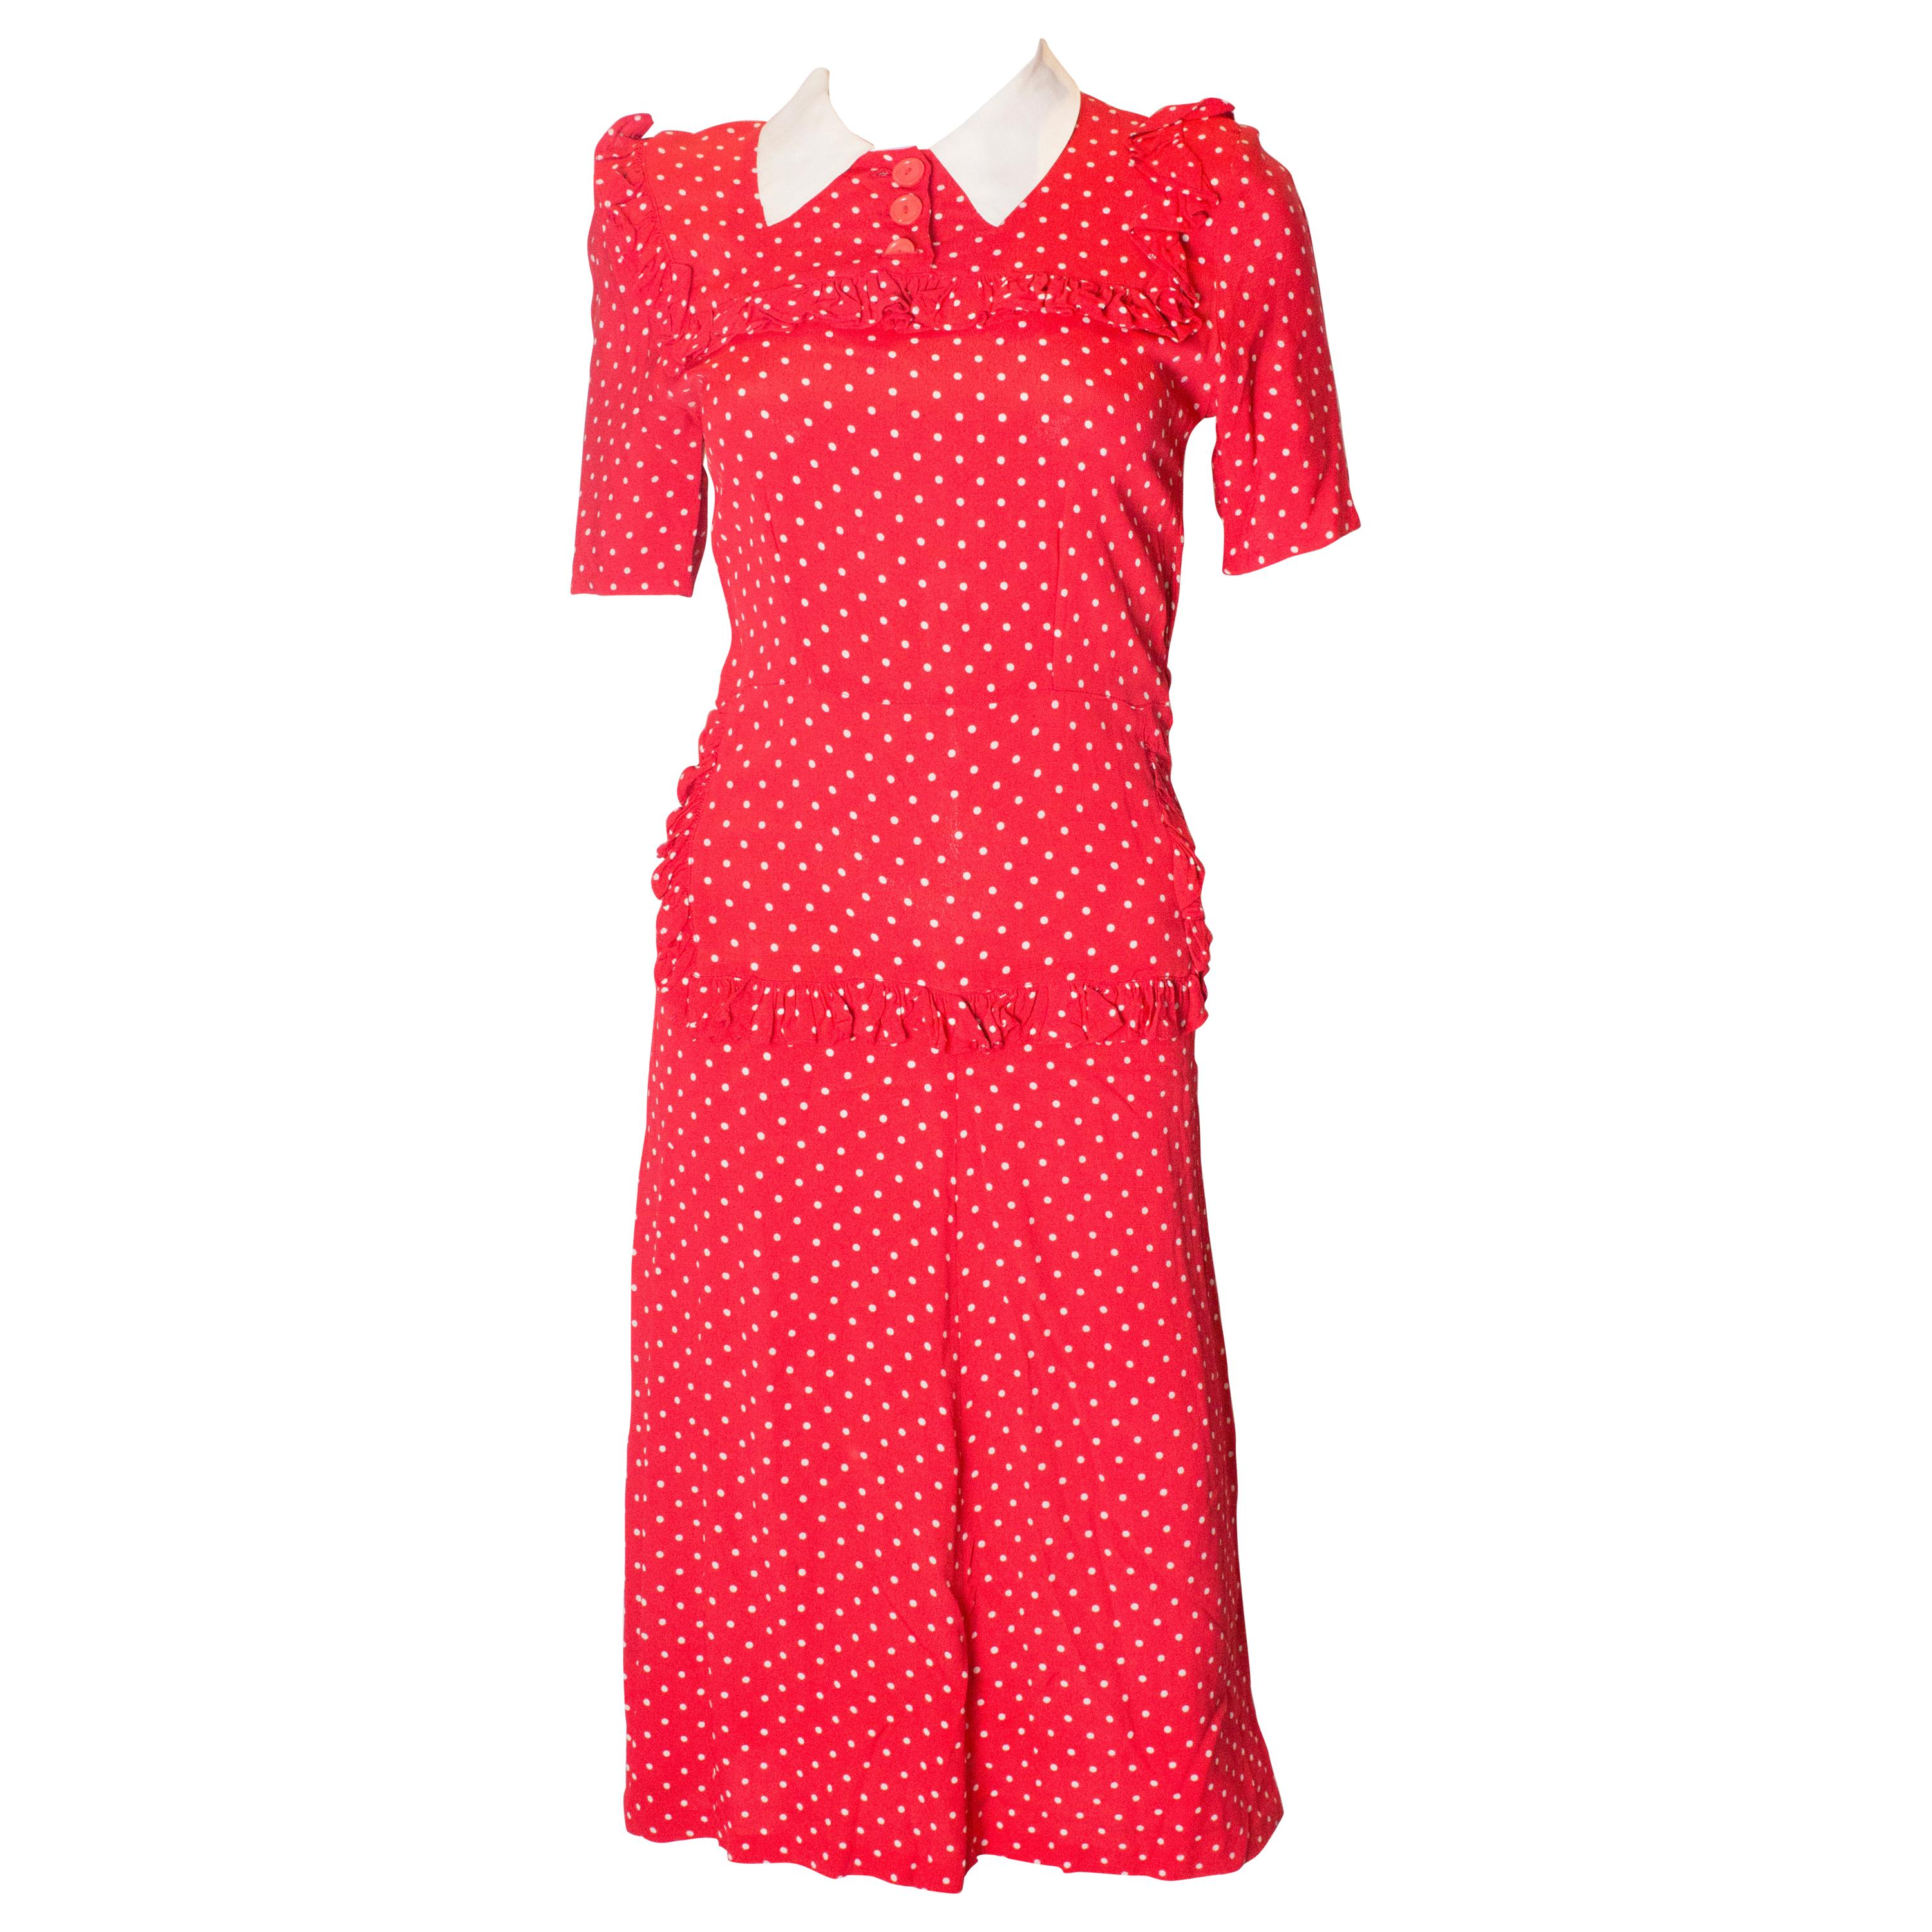 Vintage 1940s Red Polka Dot Dress with Frill Trim